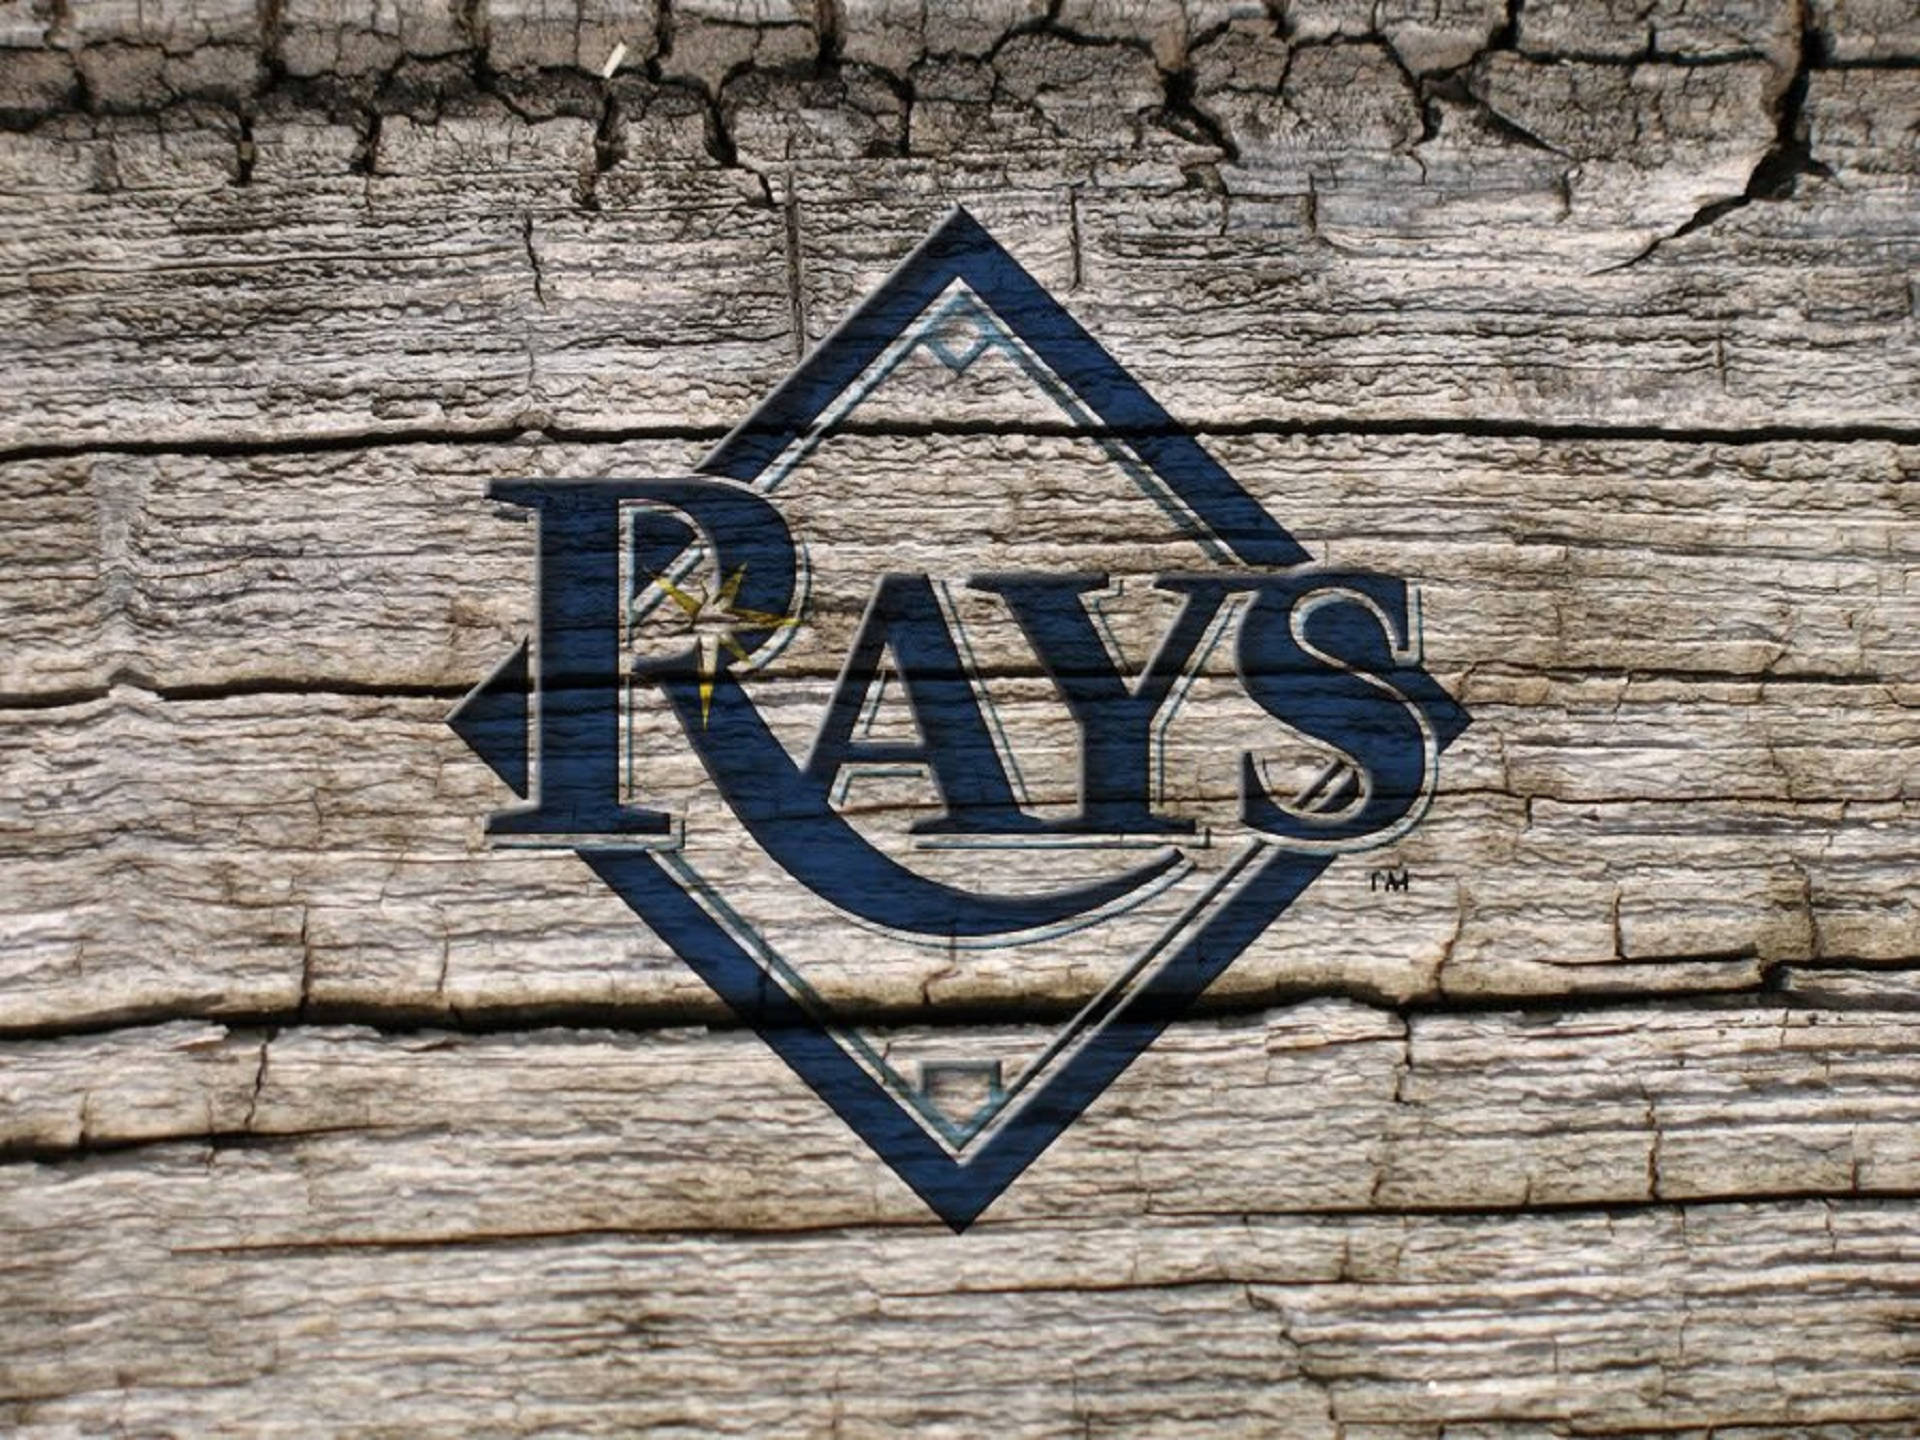 Tampa Bay Rays Logo In Old Wood